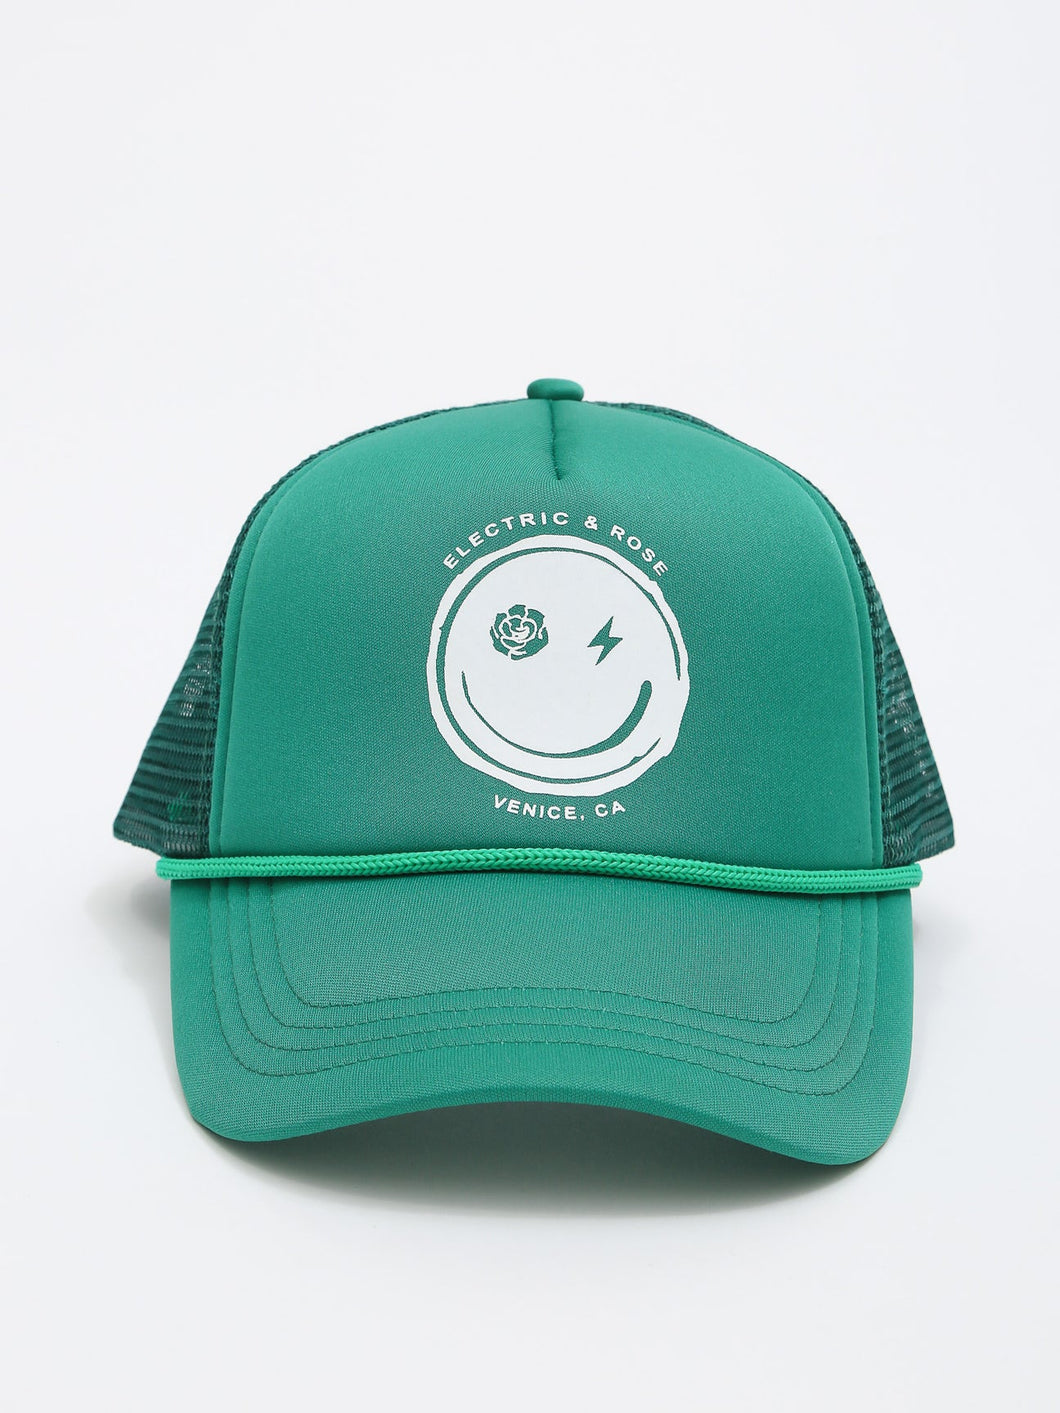 ELECTRIC & ROSE SMILEY FACE TRUCKER HAT